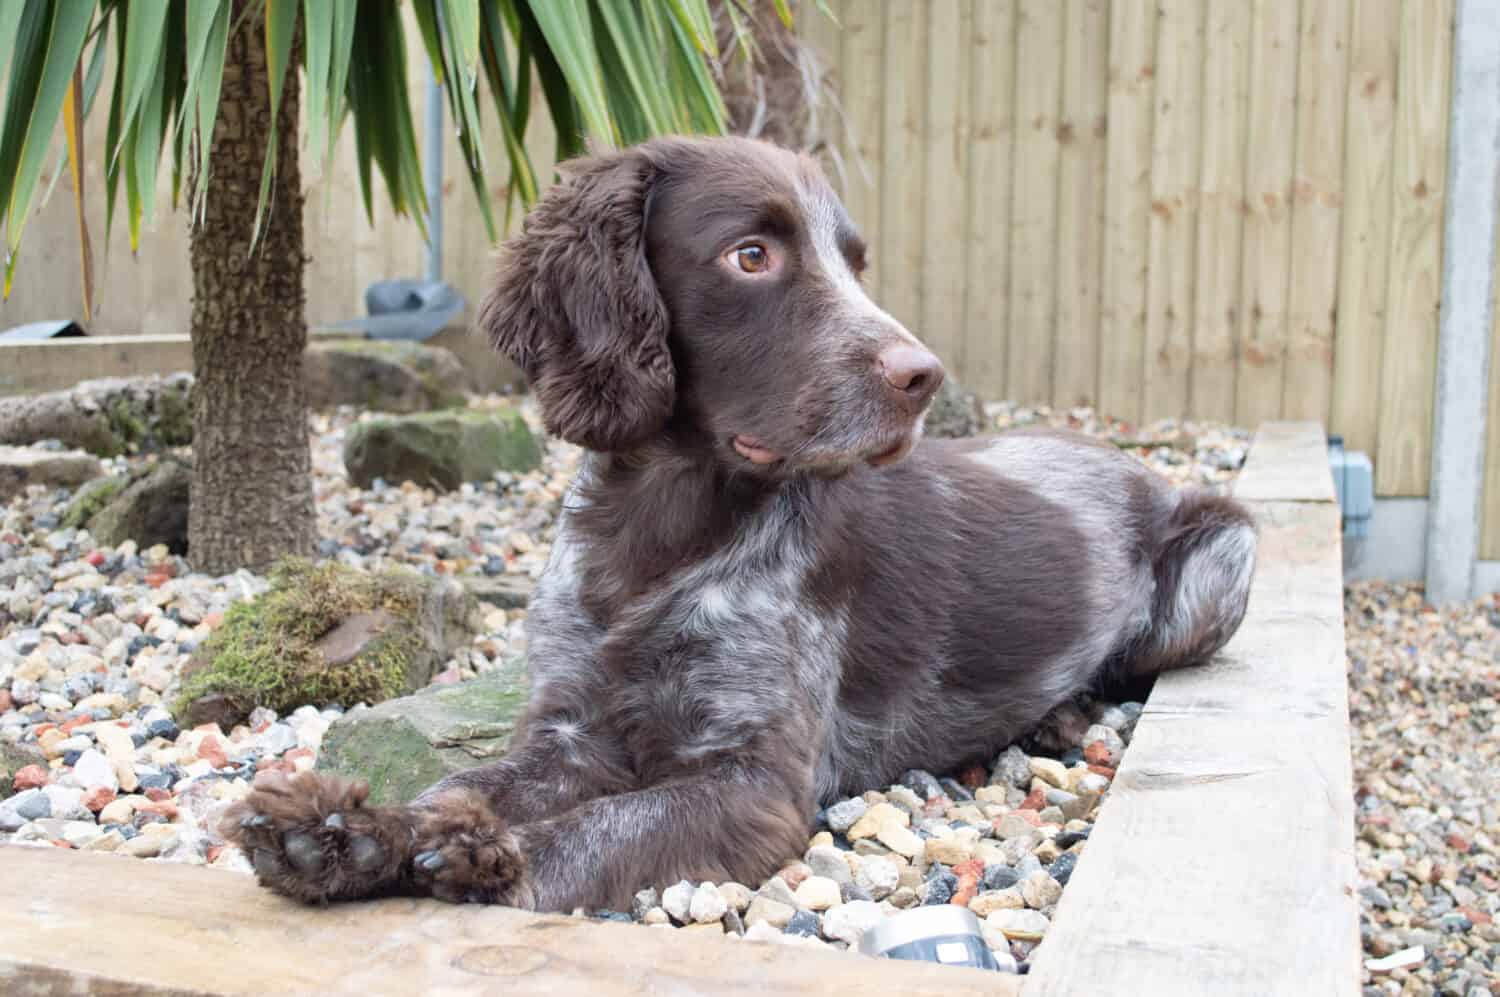 Chocolate roan Cocker Spaniel called Ted